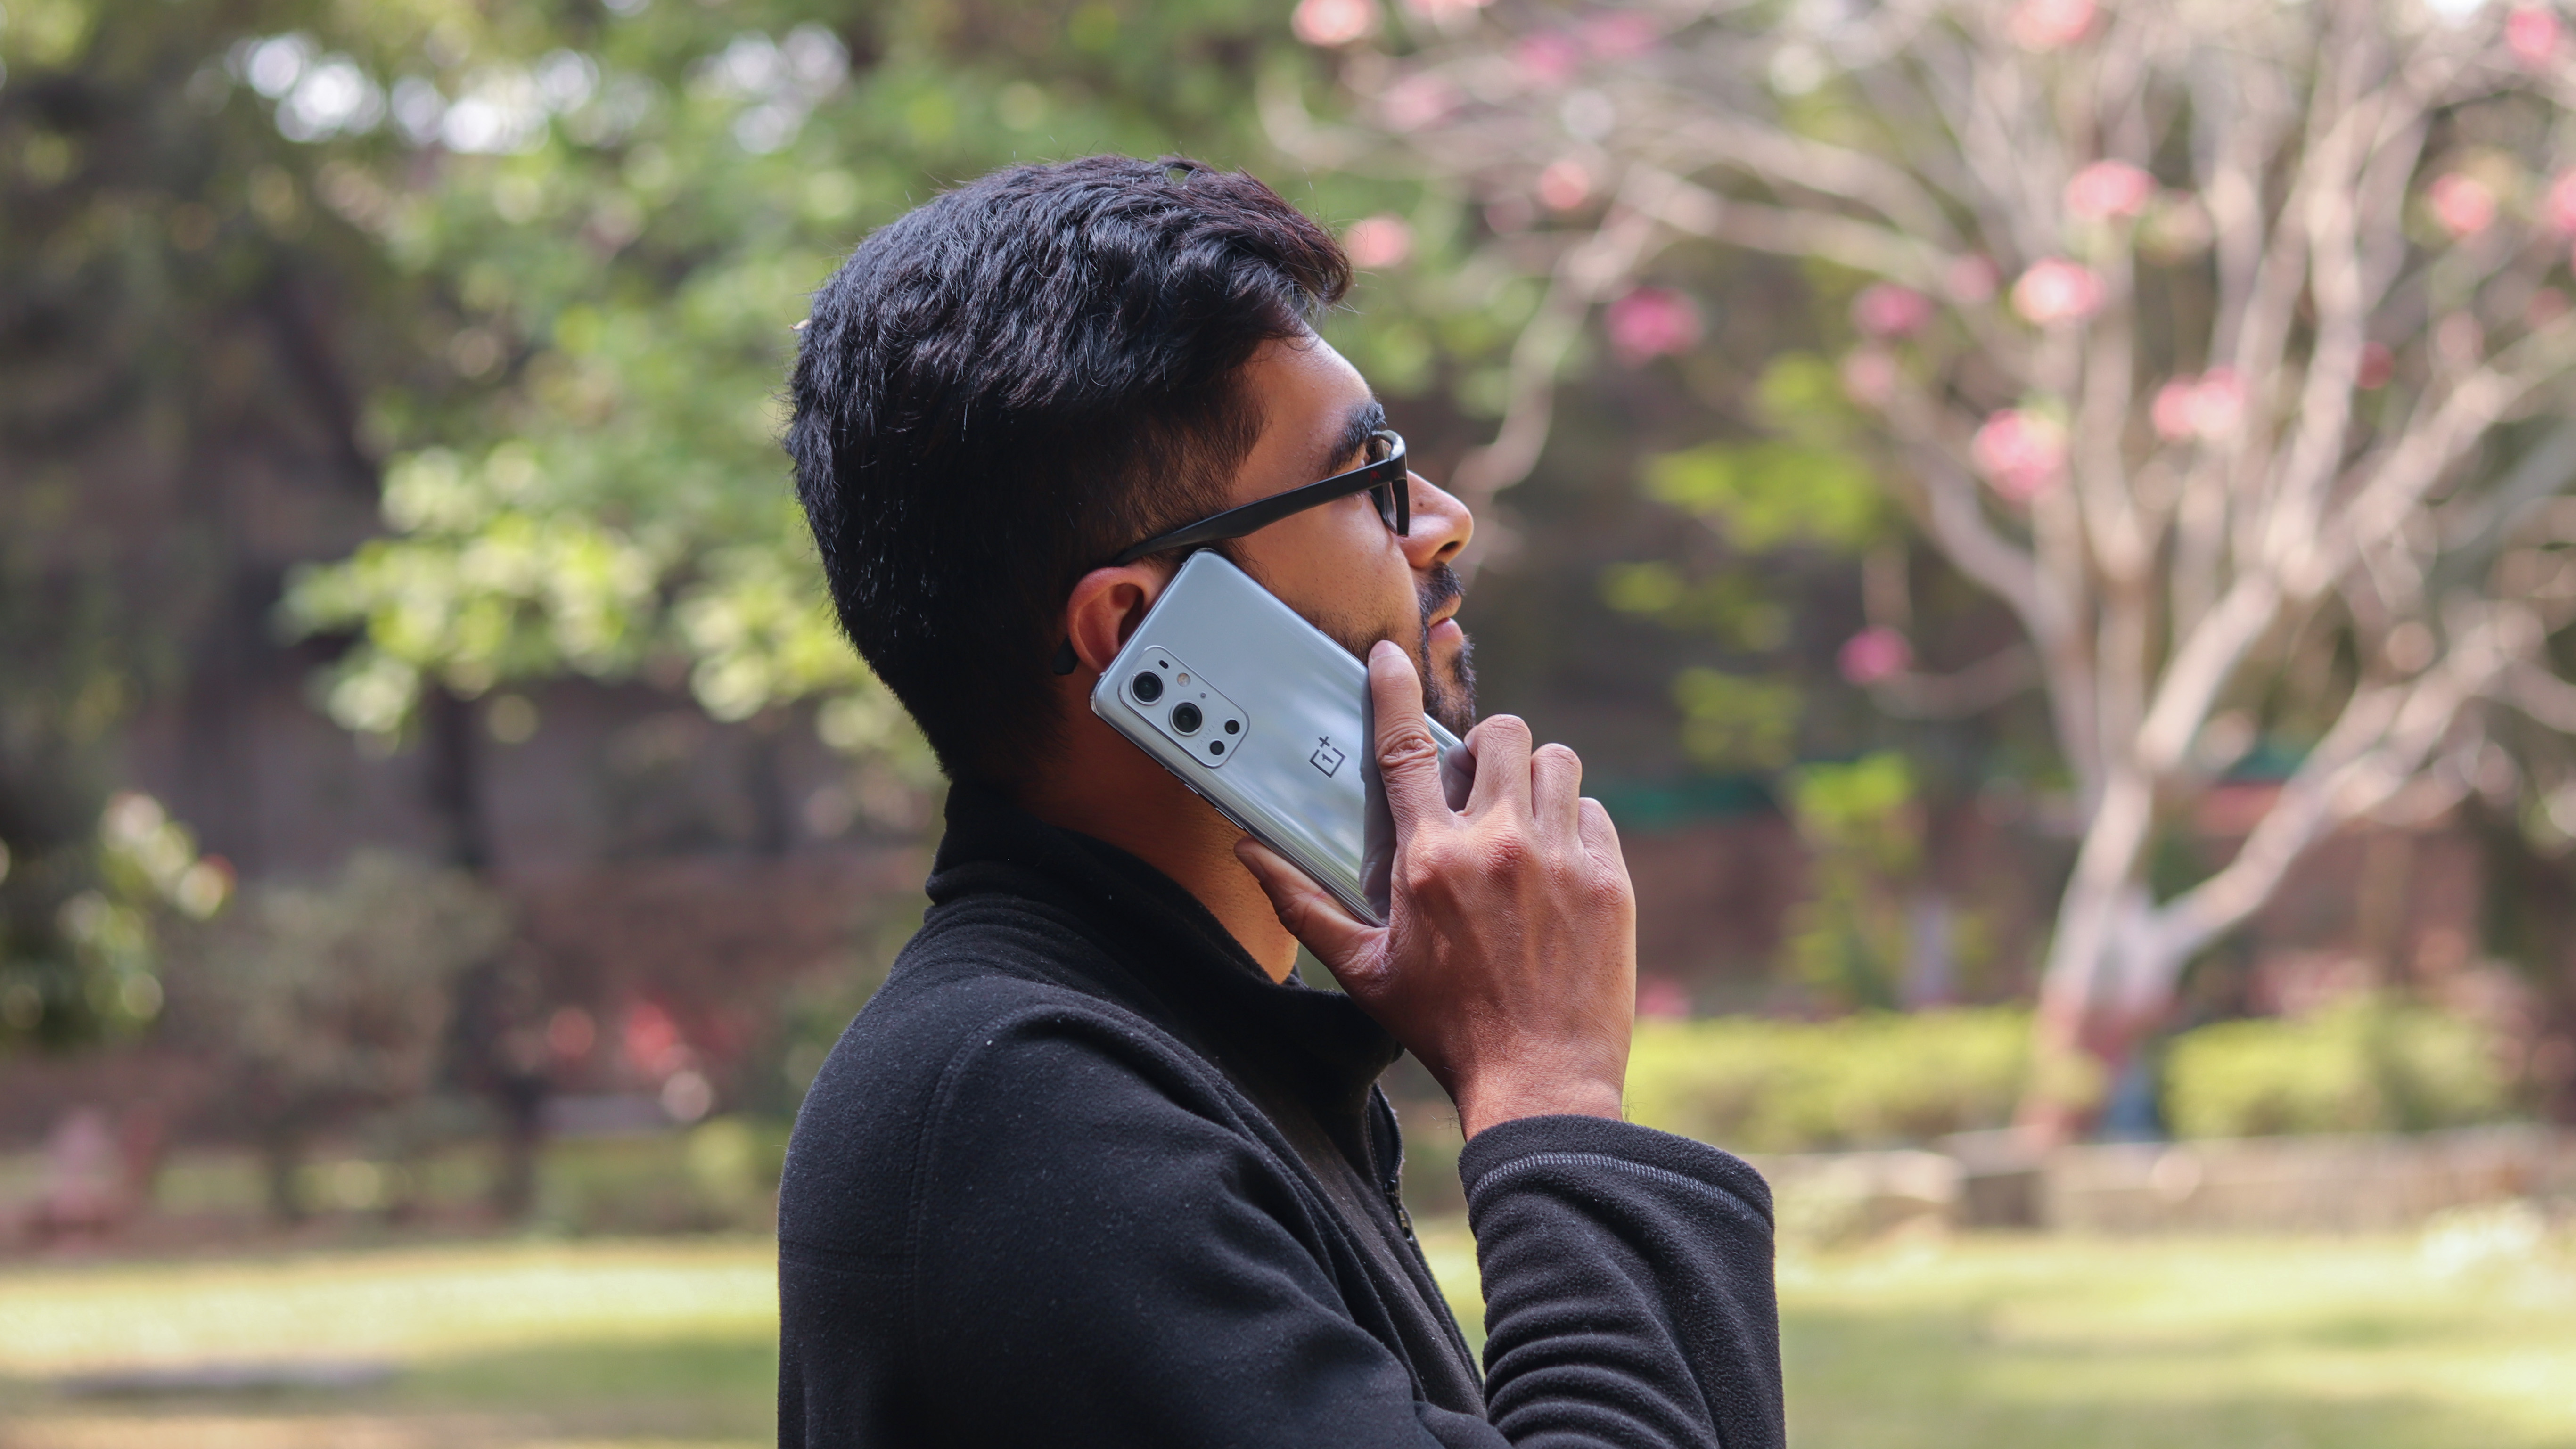 OnePlus 9 phones support only two 5G bands in India. But, does it matter?